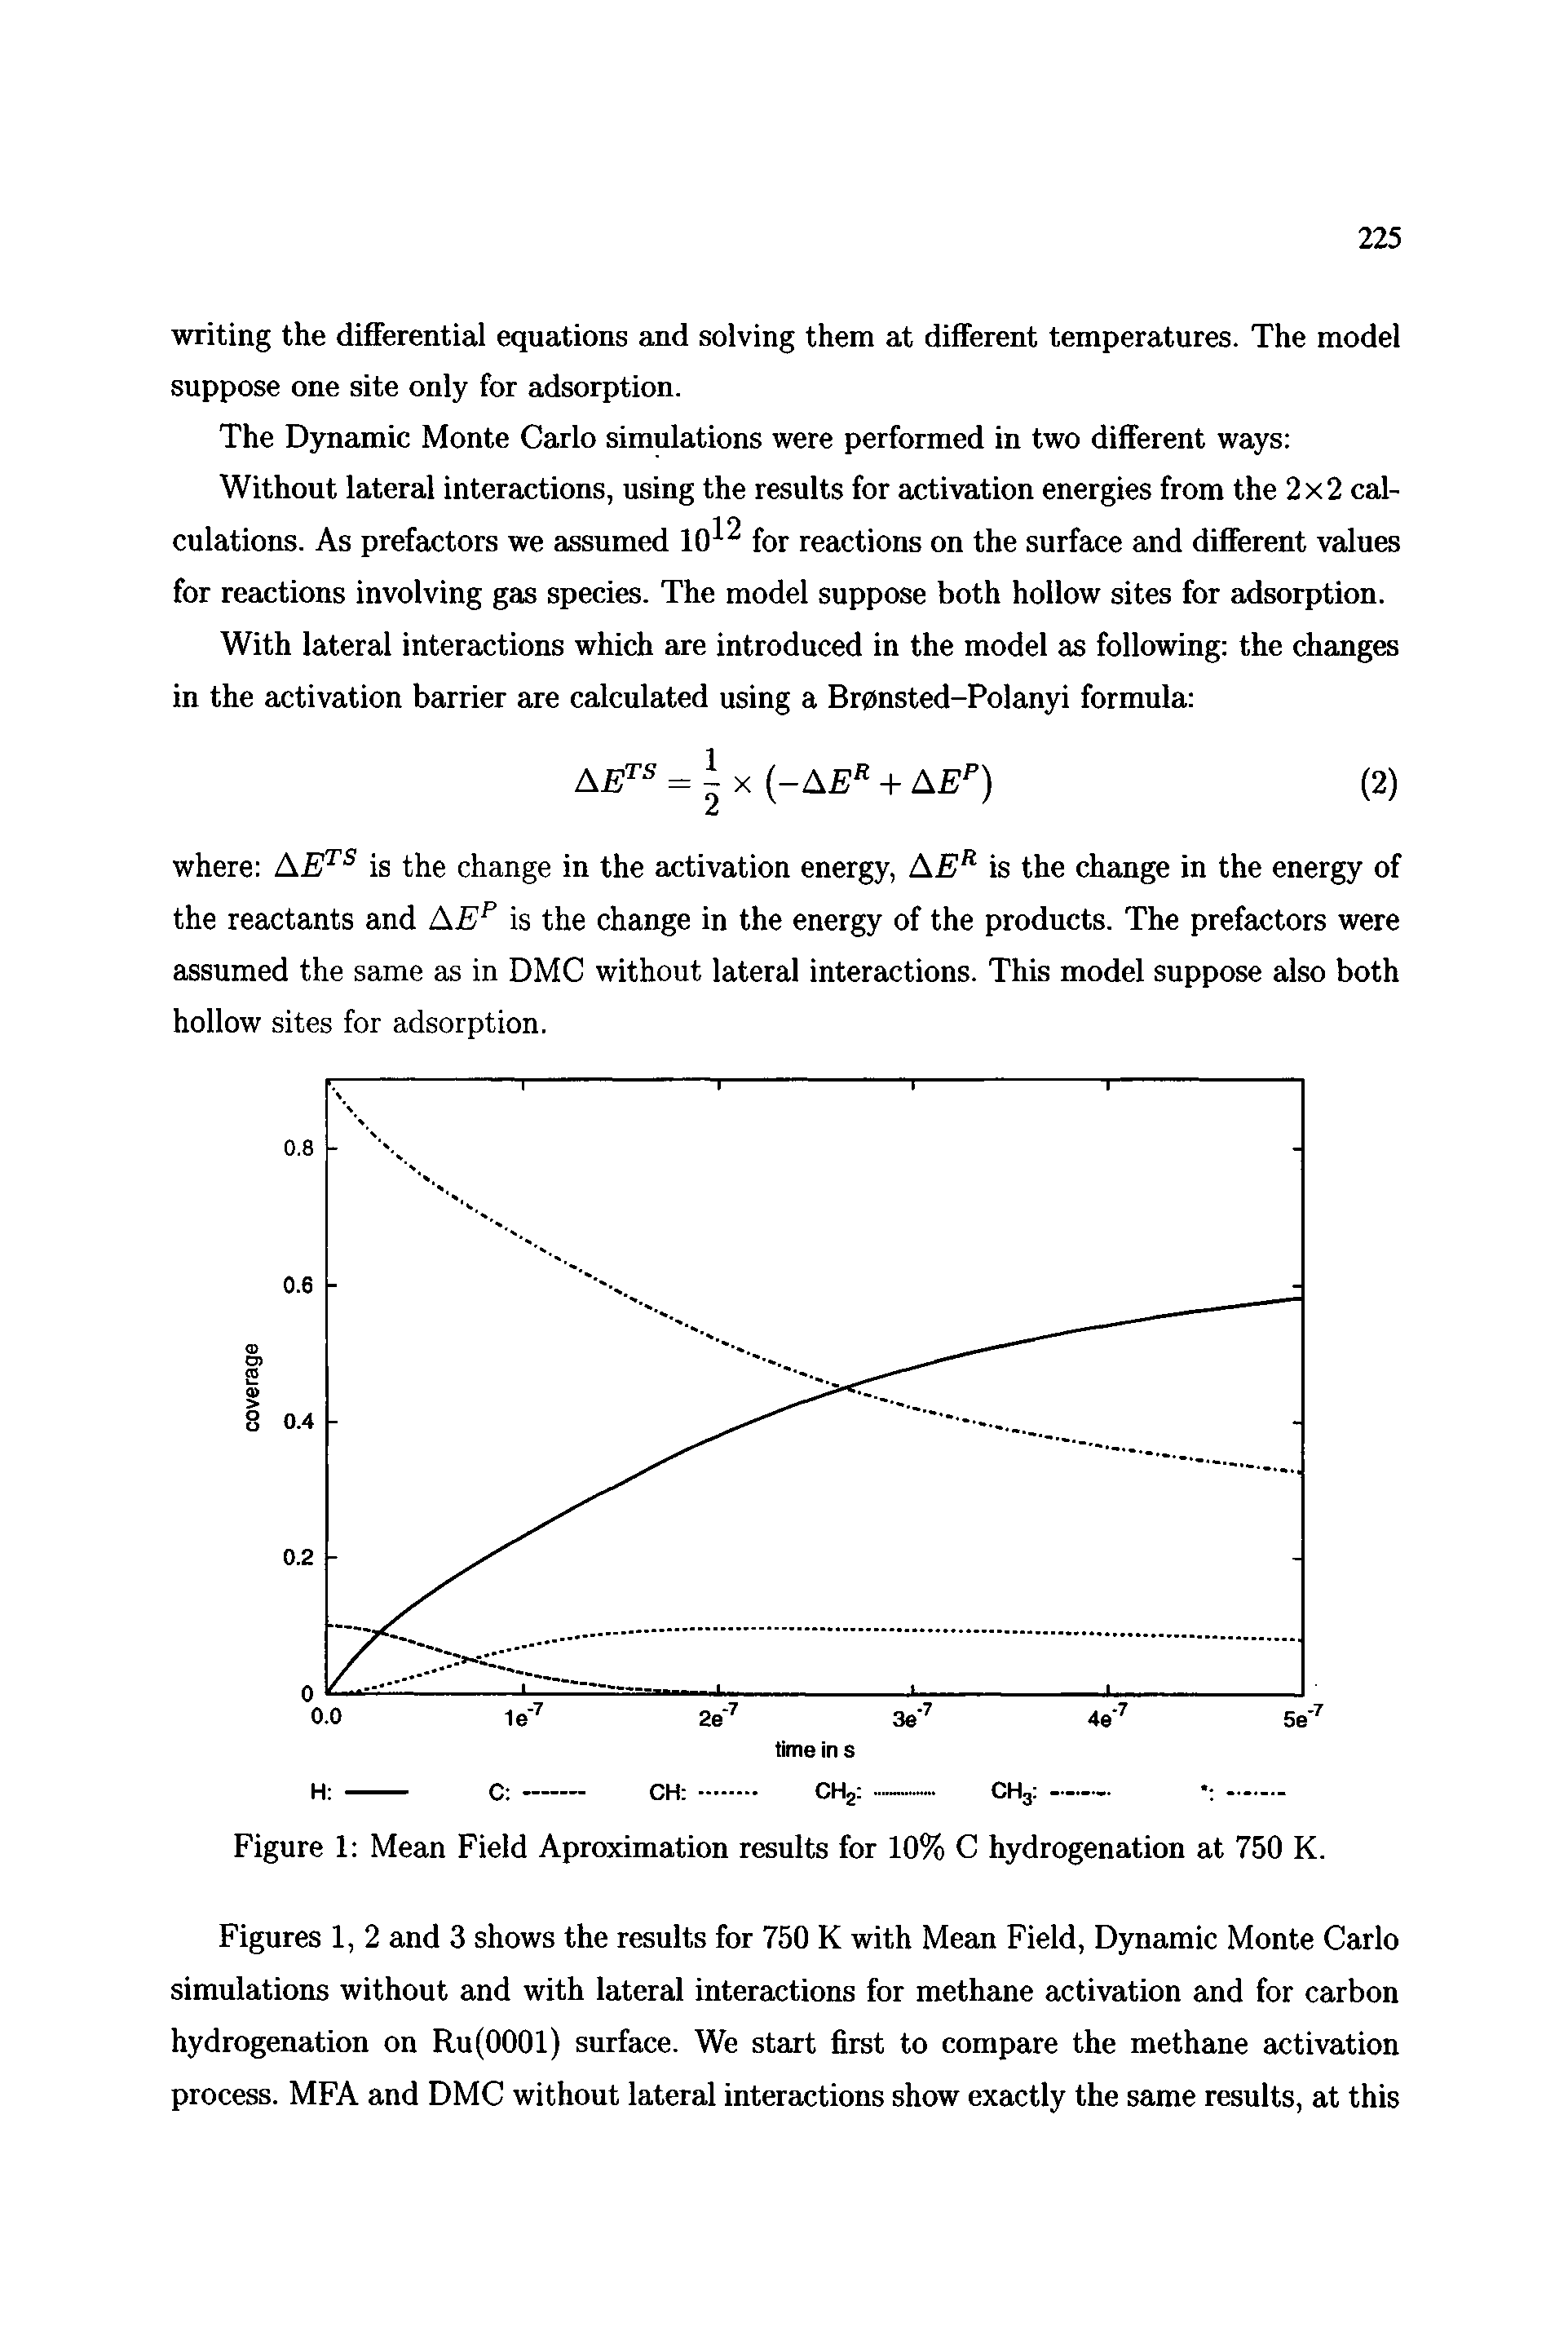 Figures 1, 2 and 3 shows the results for 750 K with Mean Field, Dynamic Monte Carlo simulations without and with lateral interactions for methane activation and for carbon hydrogenation on Ru(OOOl) surface. We start first to compare the methane activation process. MFA and DMC without lateral interactions show exactly the same results, at this...